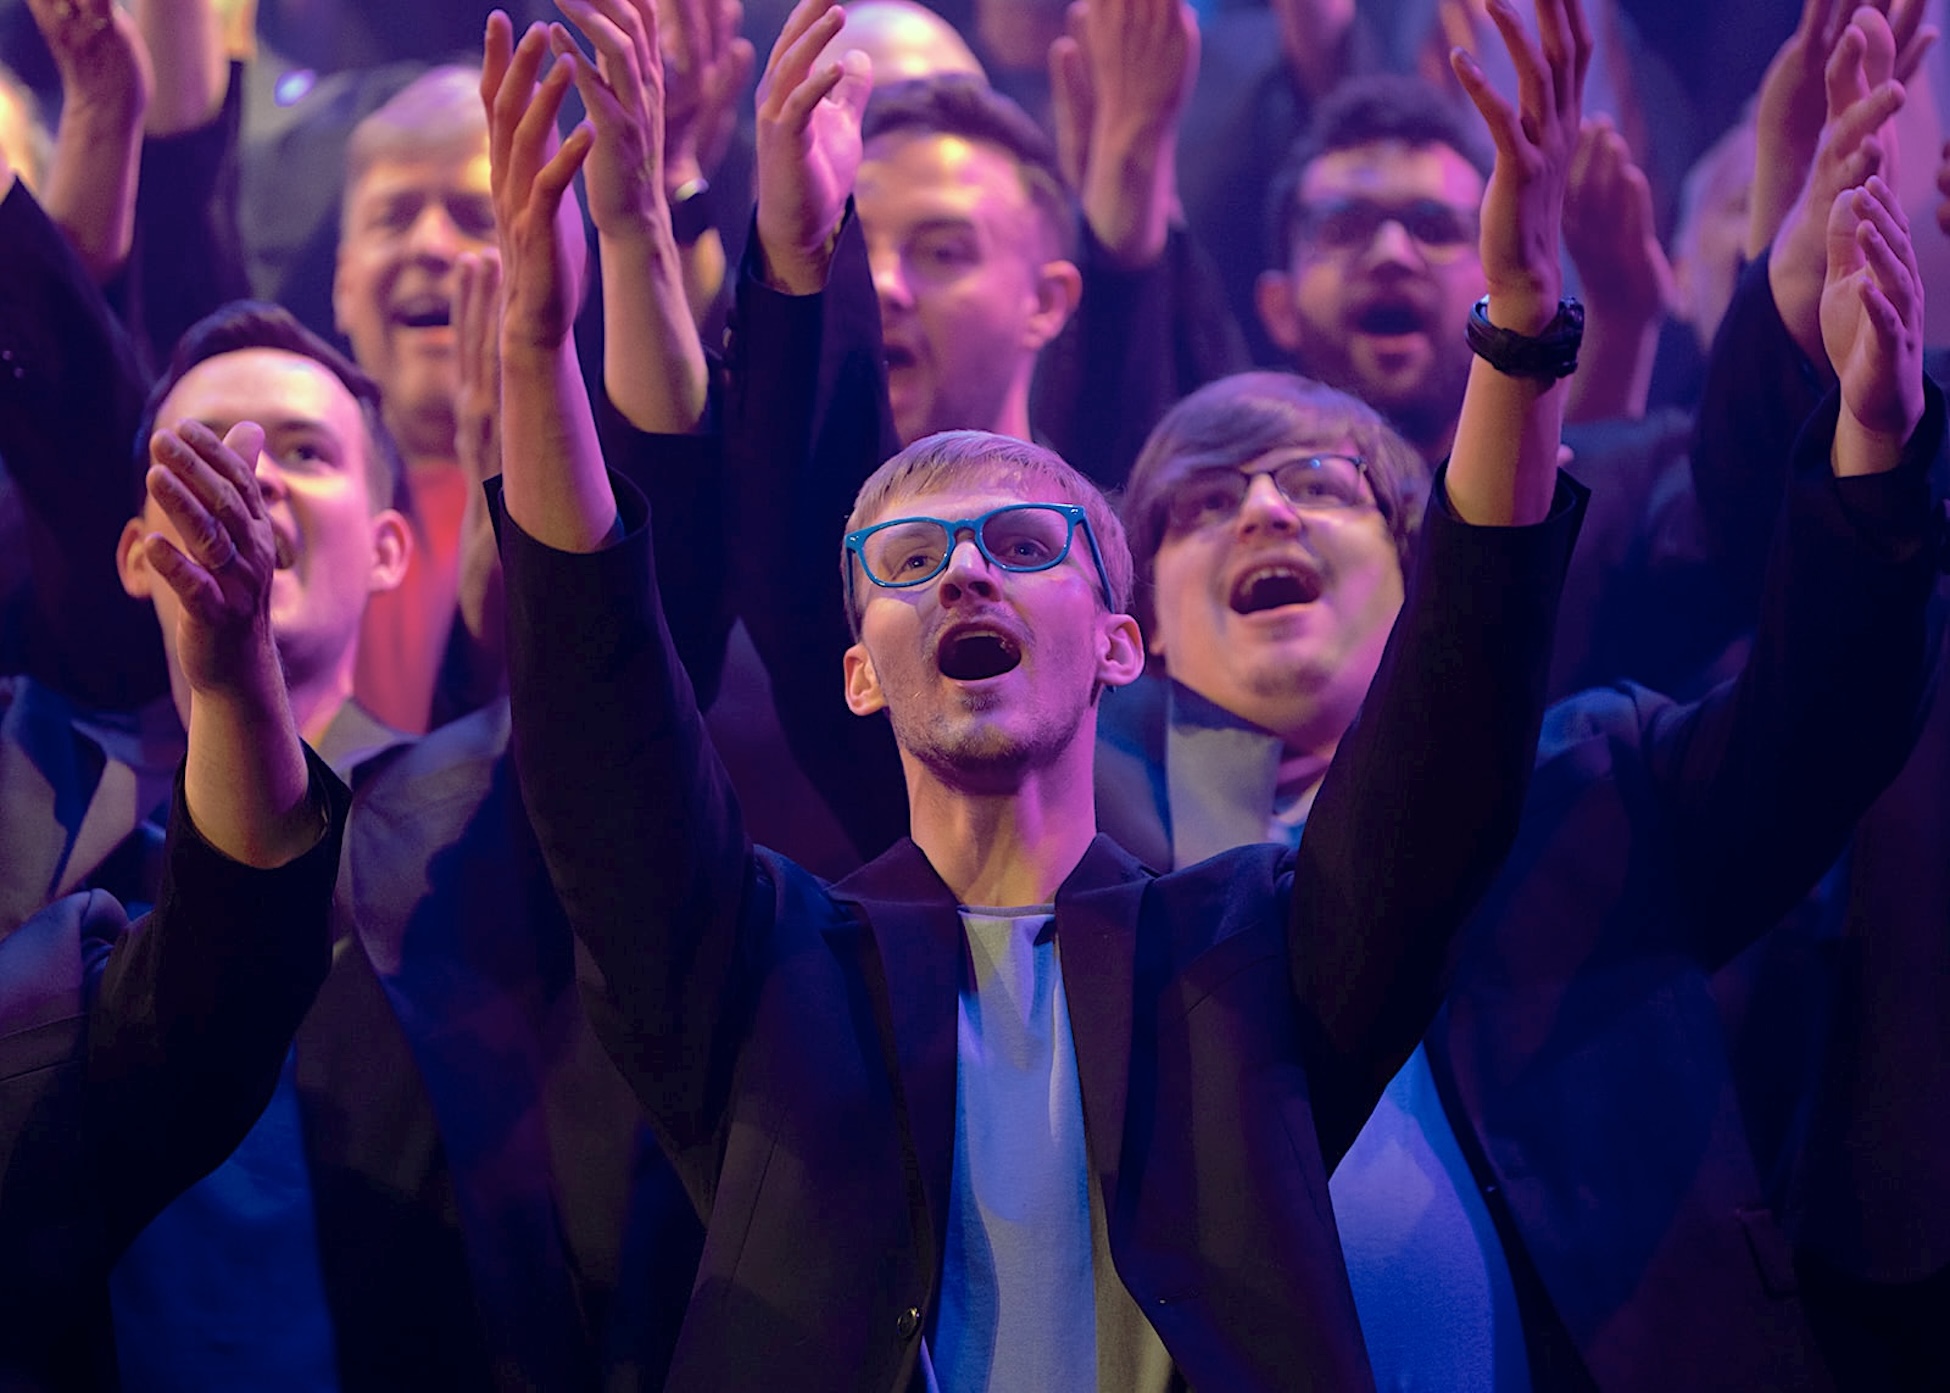 LET FREEDOM SING: Choirs address a nation still making up its mind on LGBTQ+ issues